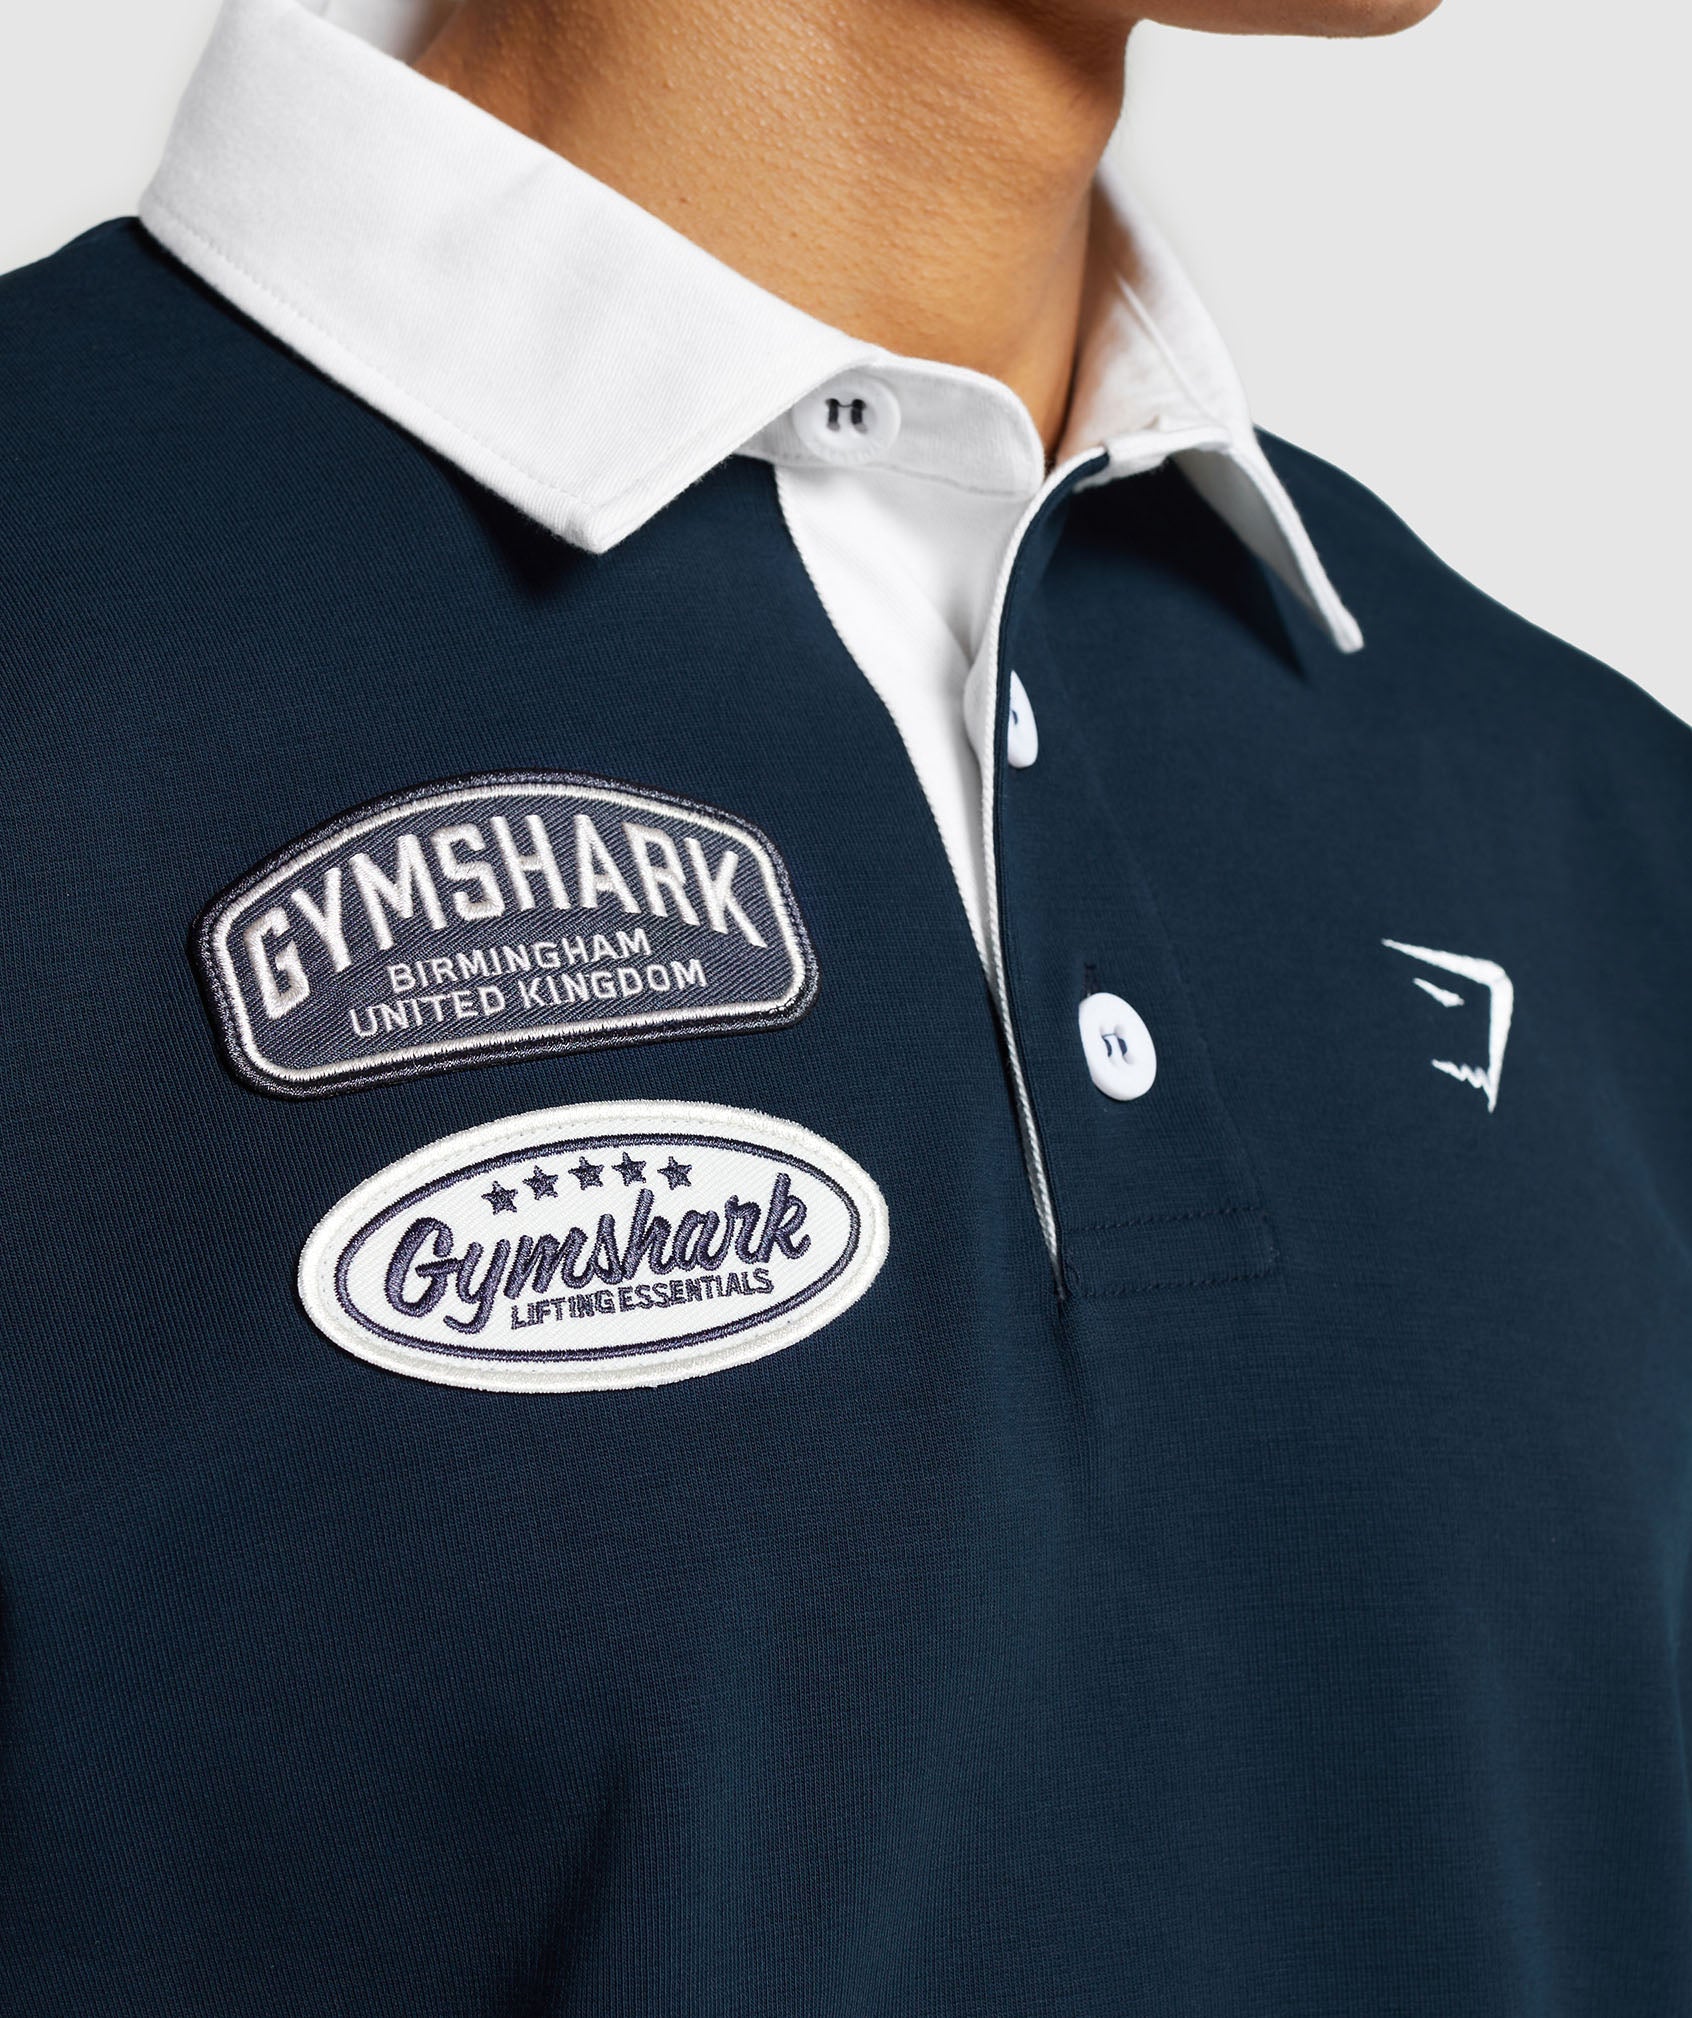 Rugby Shirt in Navy/White - view 5